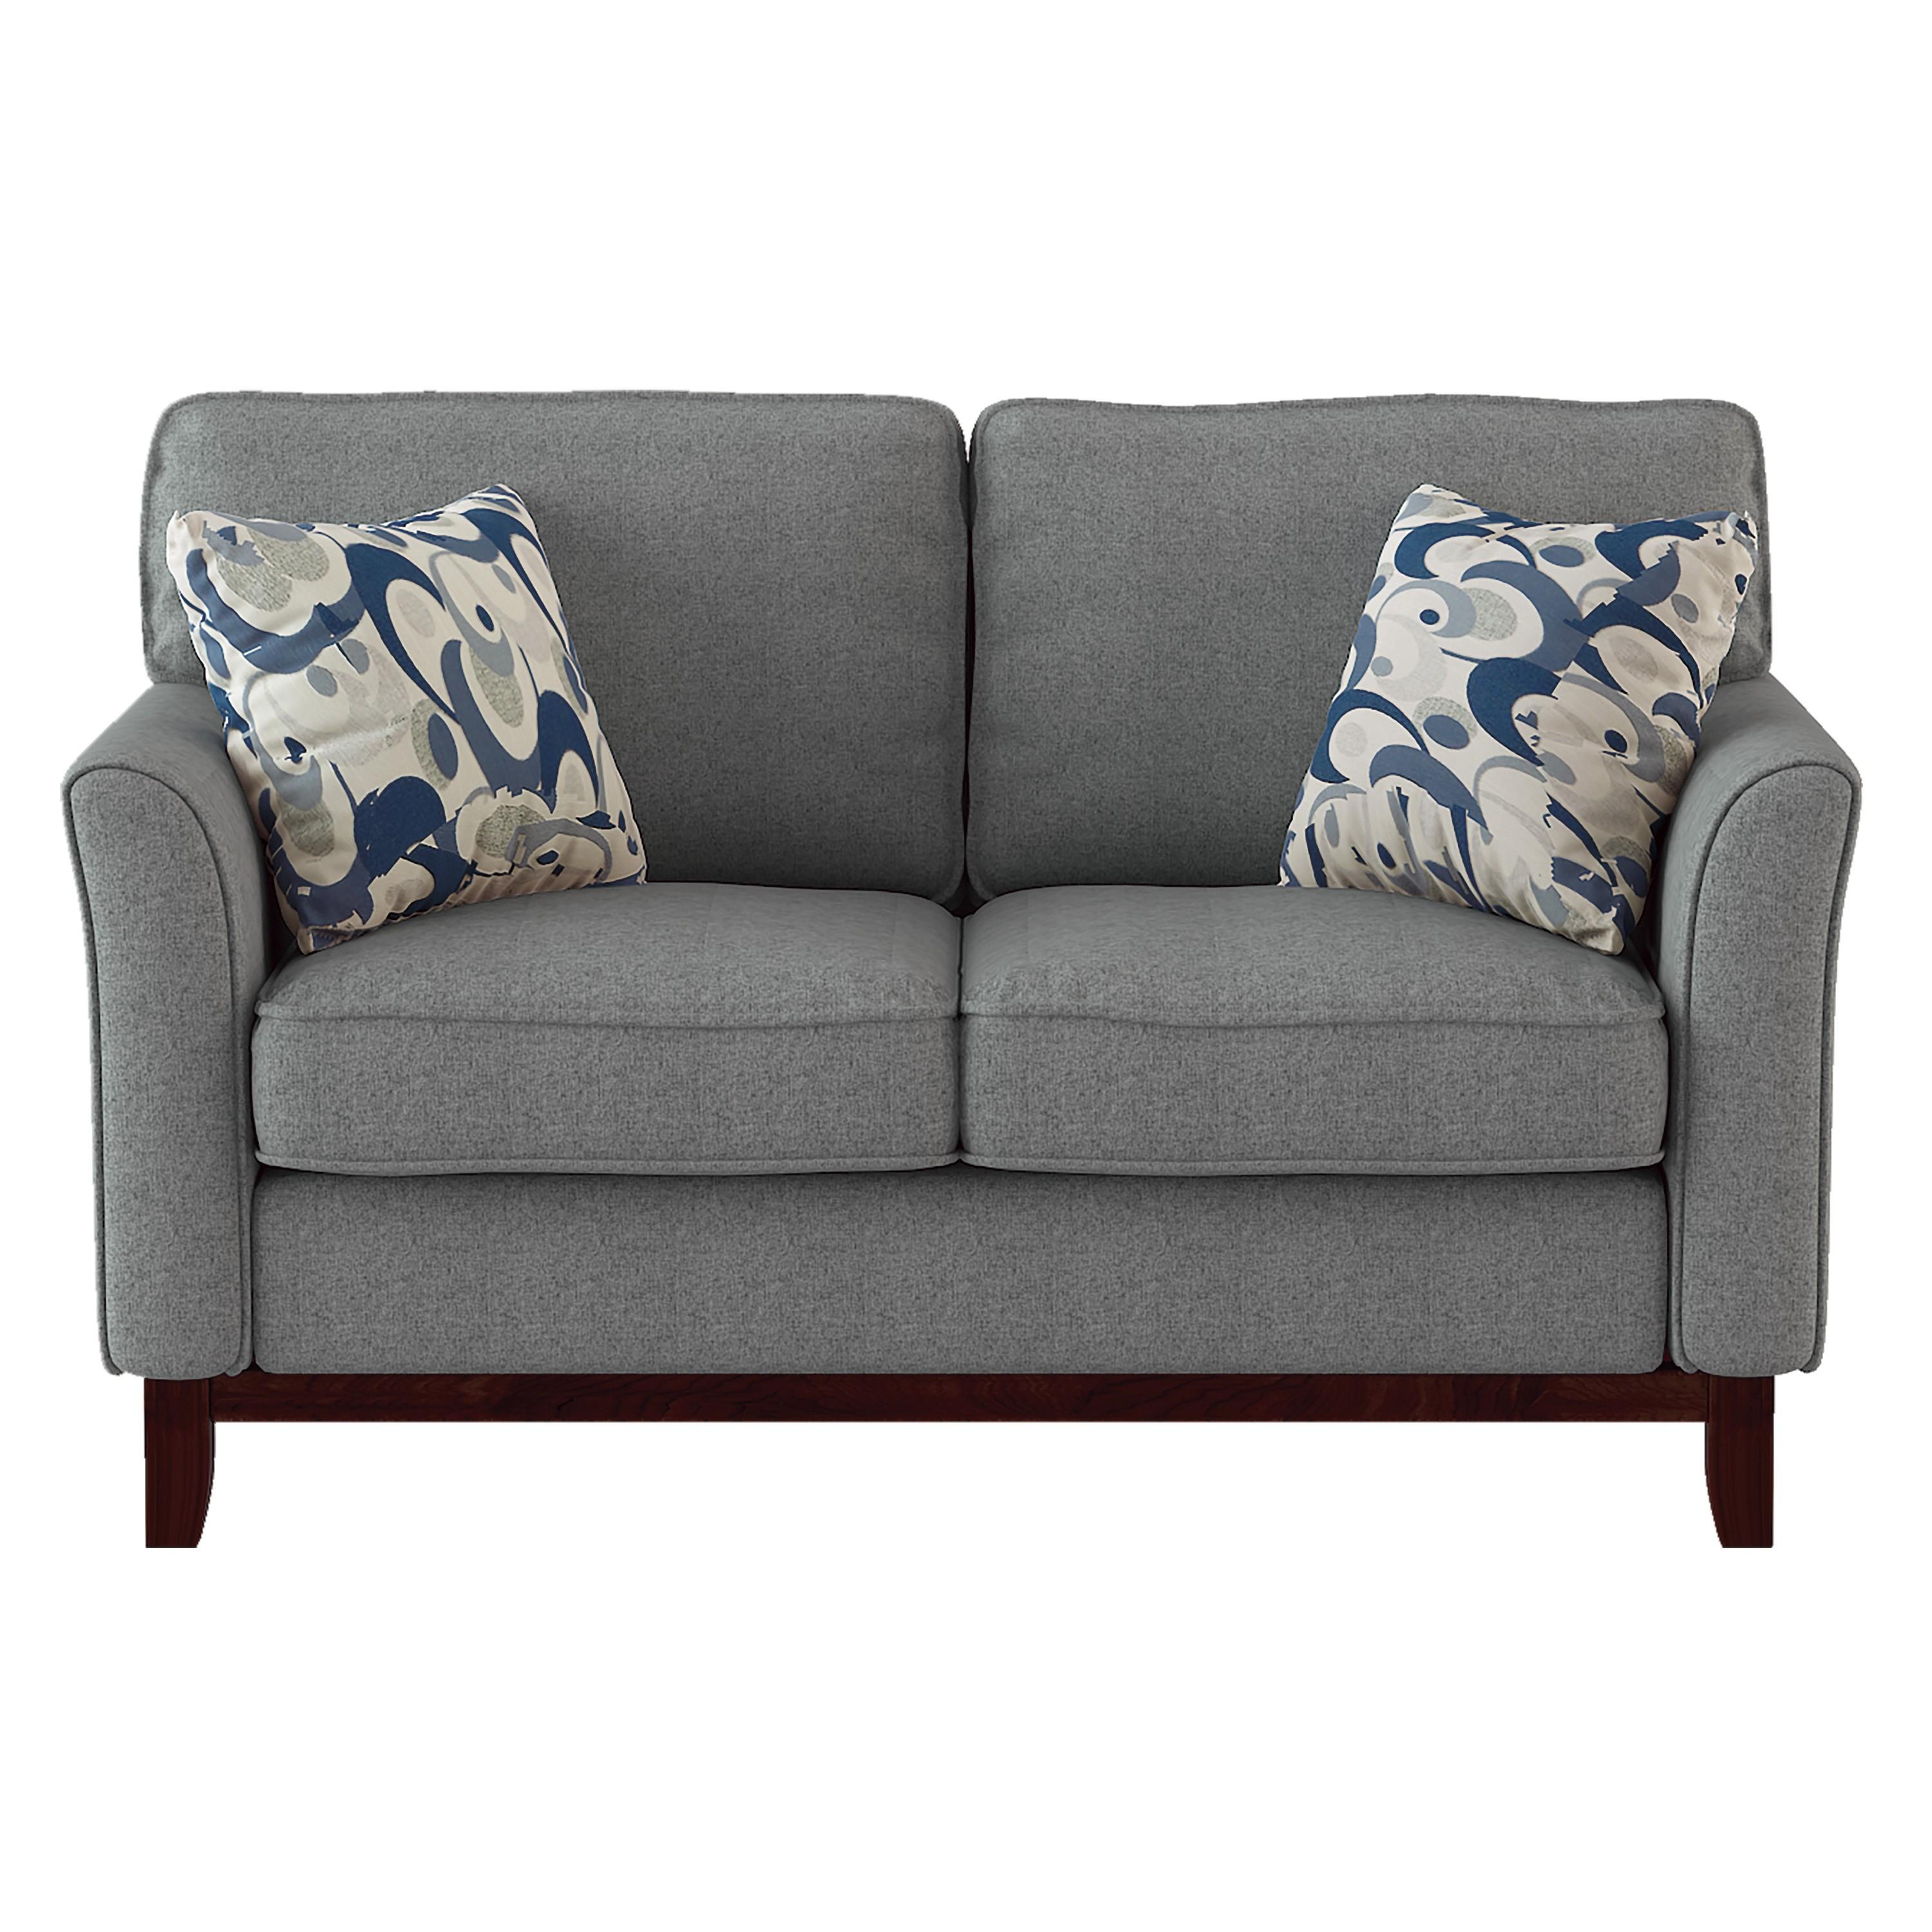 Classic Loveseat 9806GRY-2 Blue Lake 9806GRY-2 in Gray 